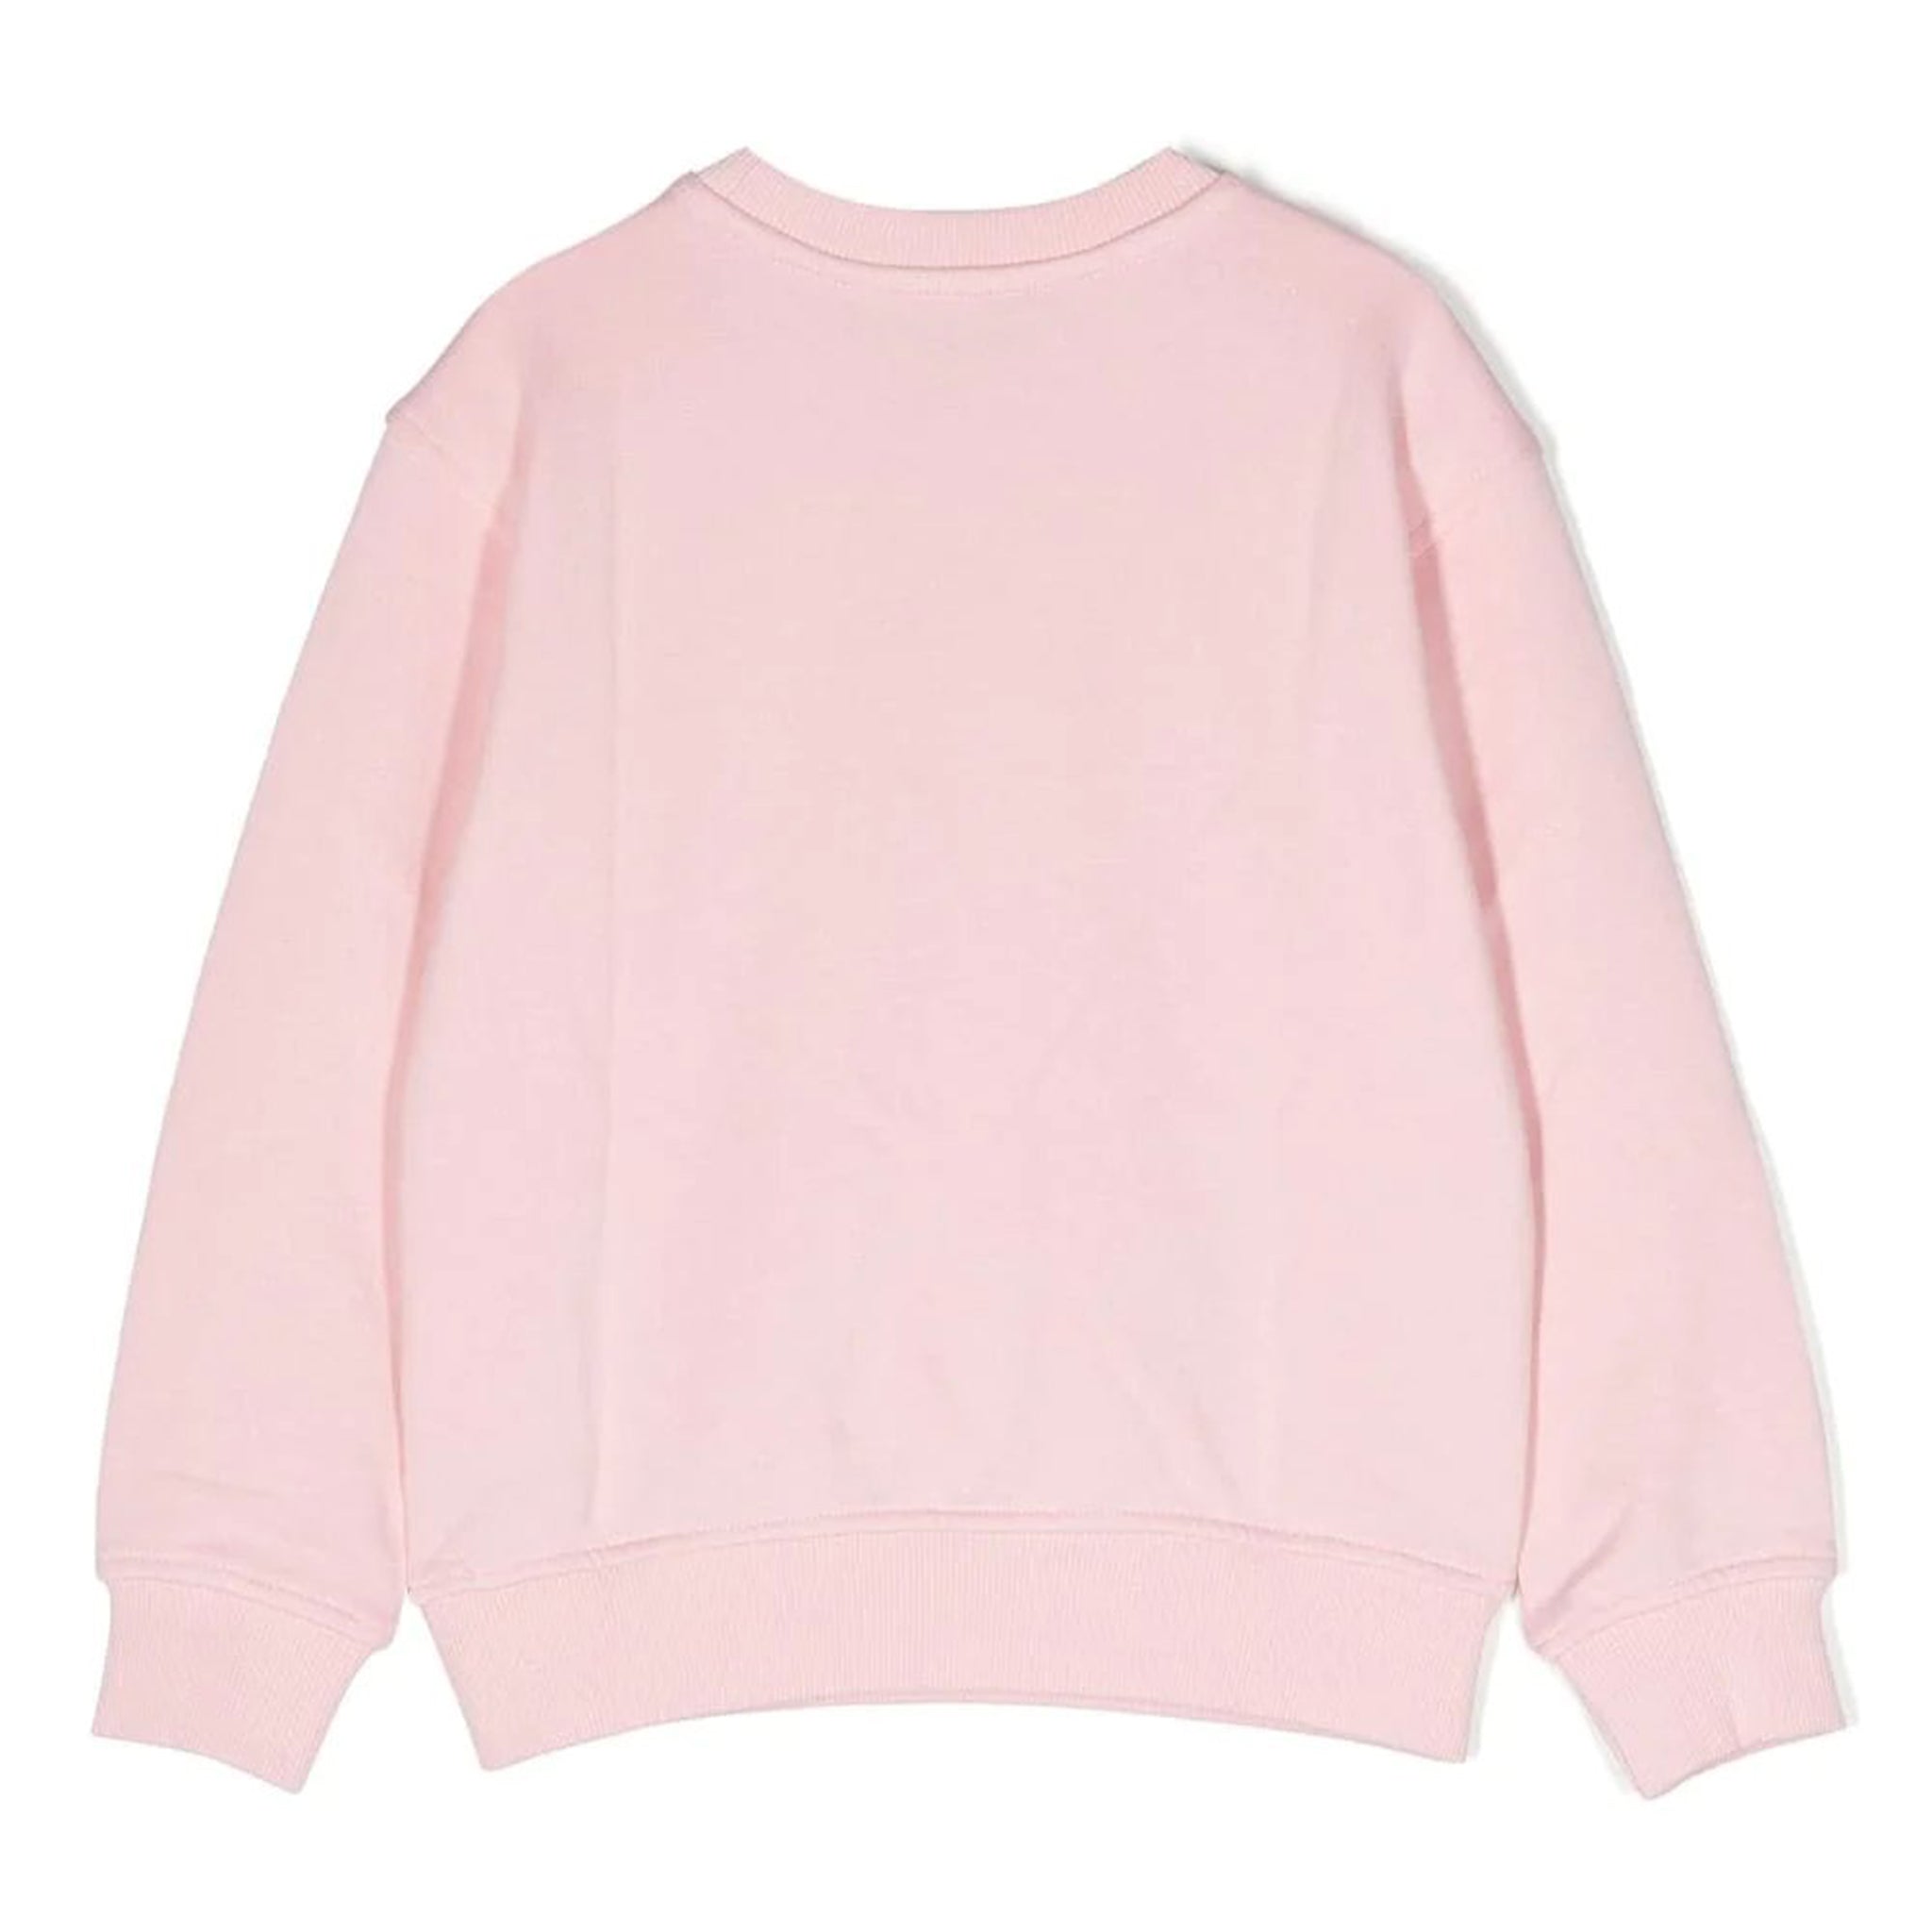 Moschino Girls Couture Logo Sweater in Pink